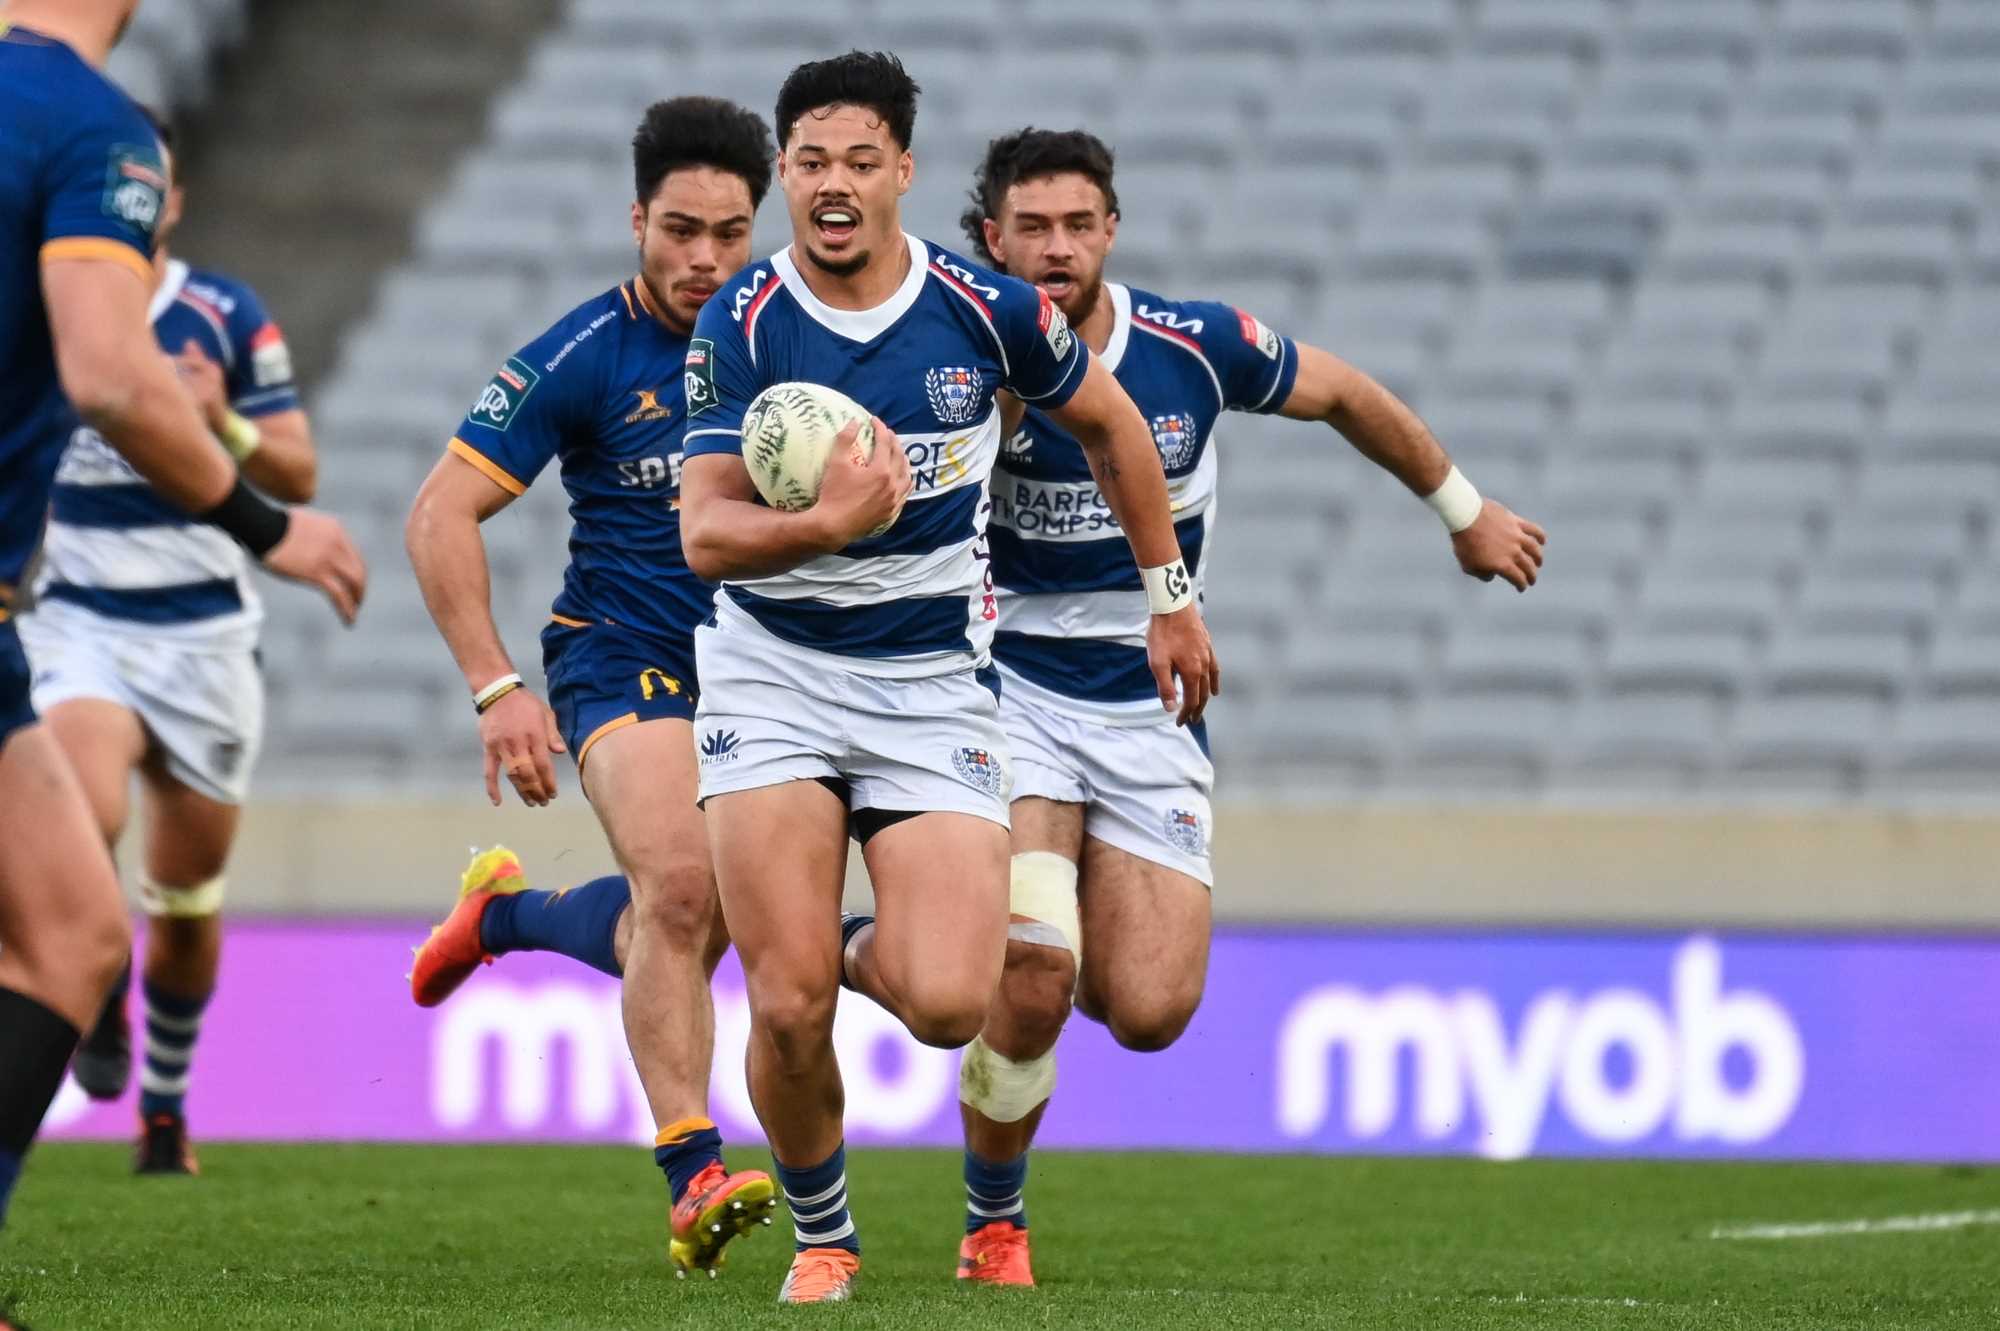 The Blue and White Hoops head north for the Taniwha